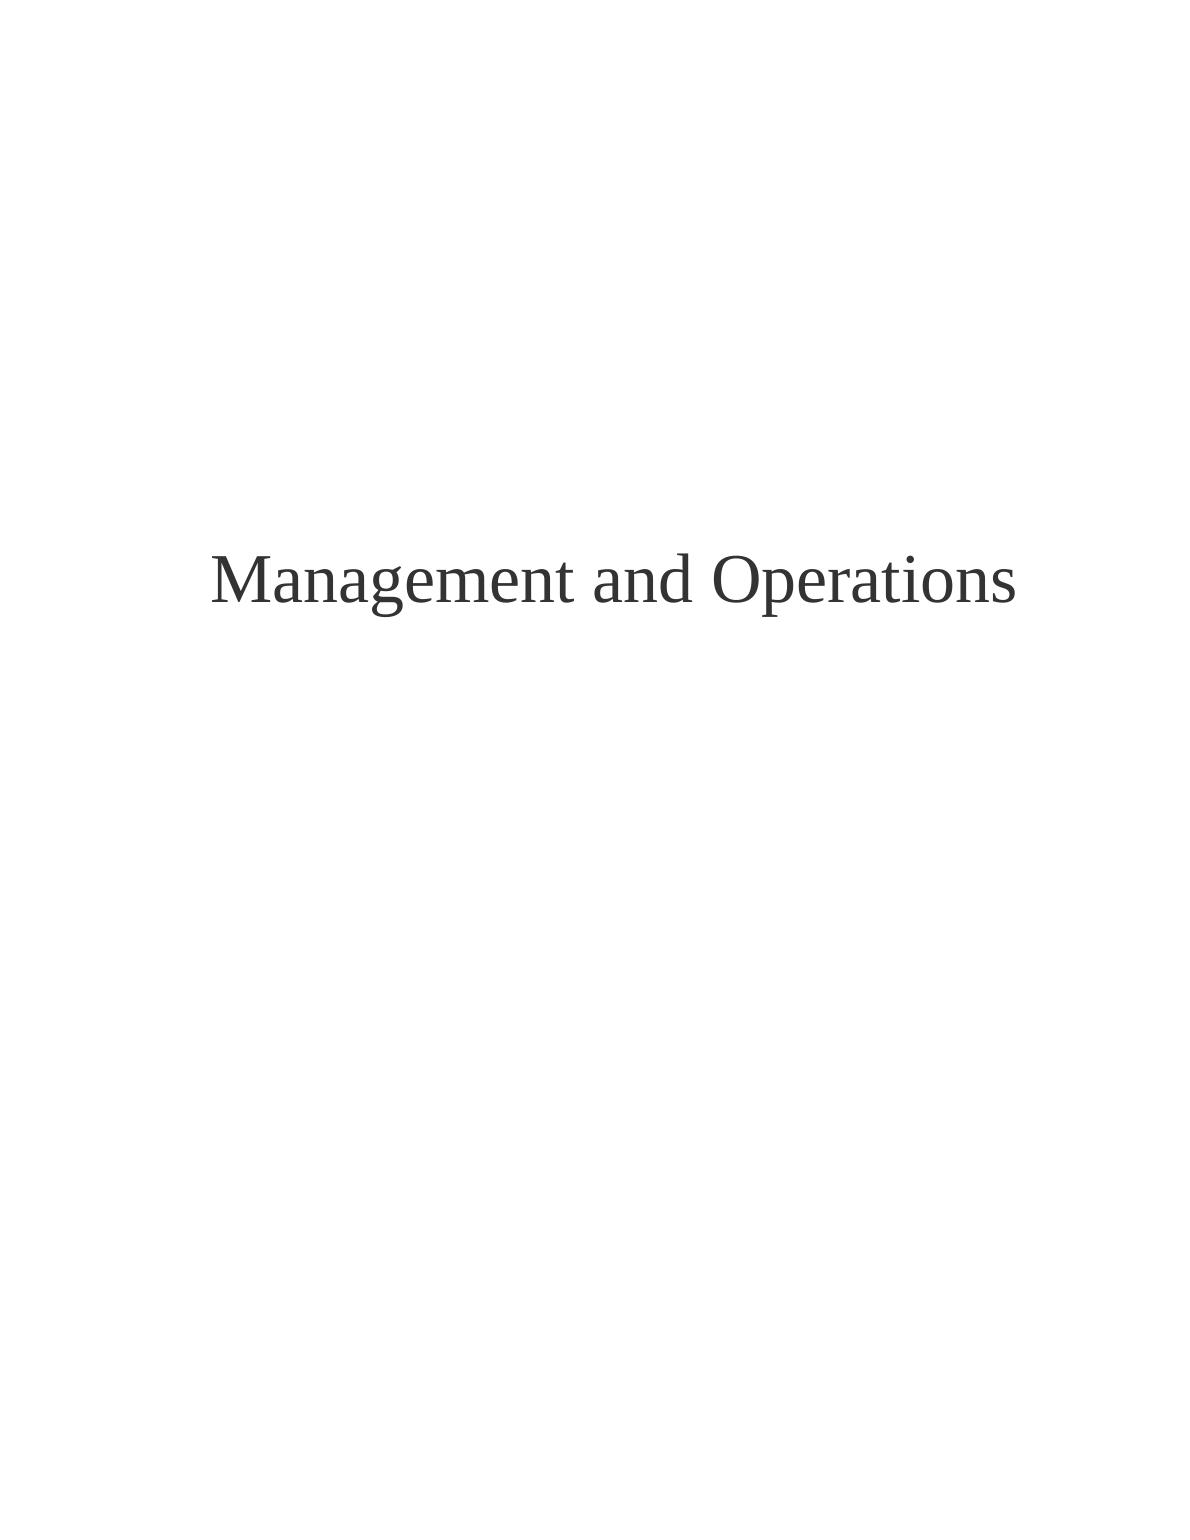 The role of leaders and managers in operations management_1